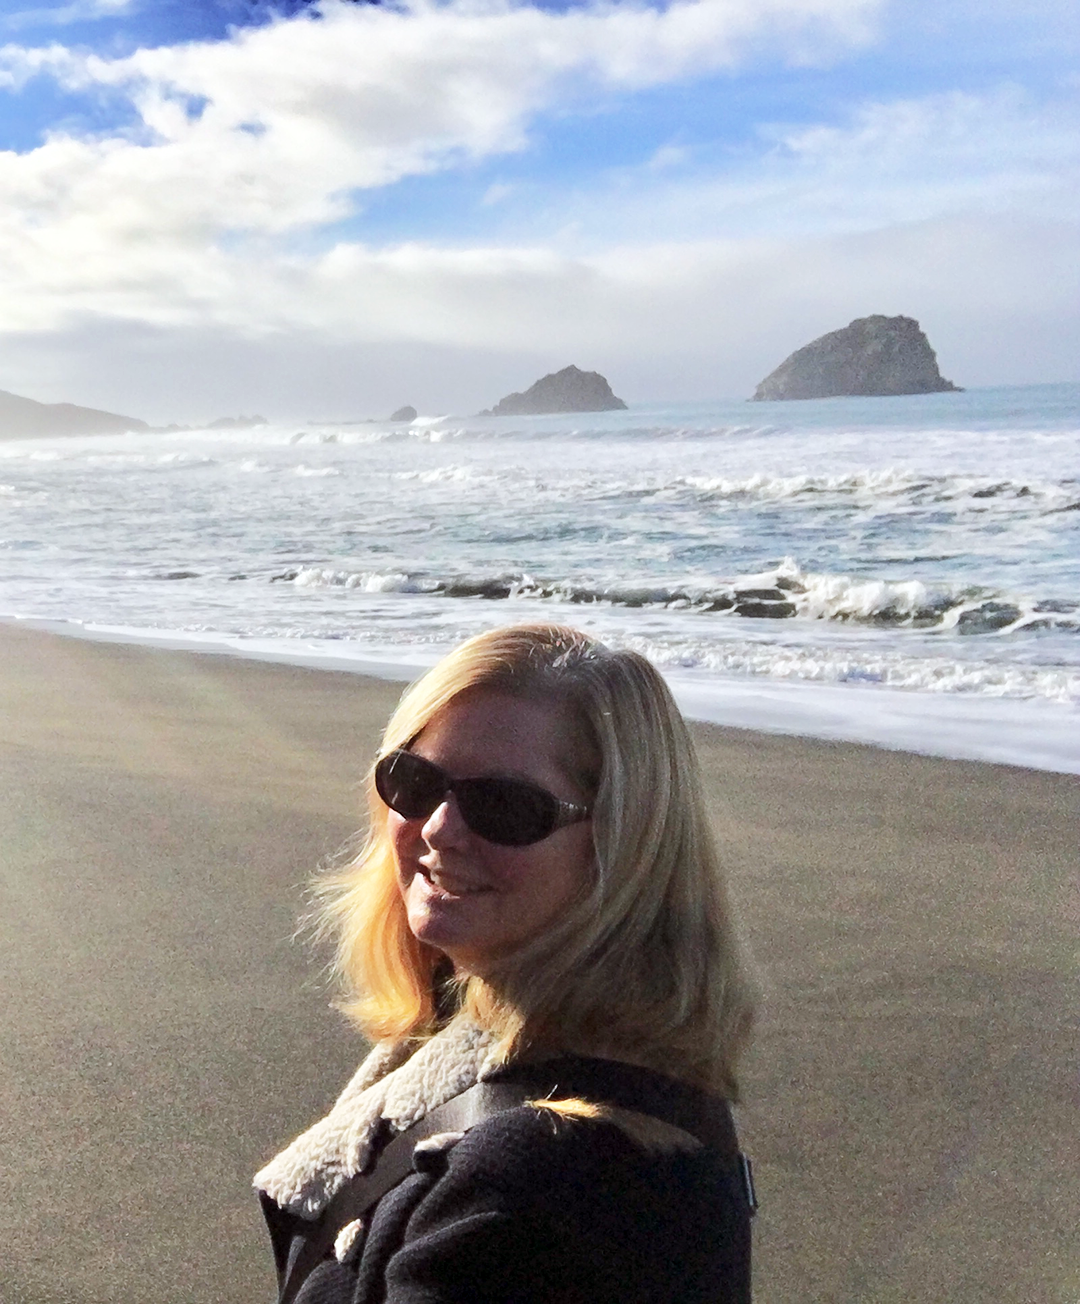 Dr. Margaret Chisolm makes time for a walk outside in the fresh ocean air.